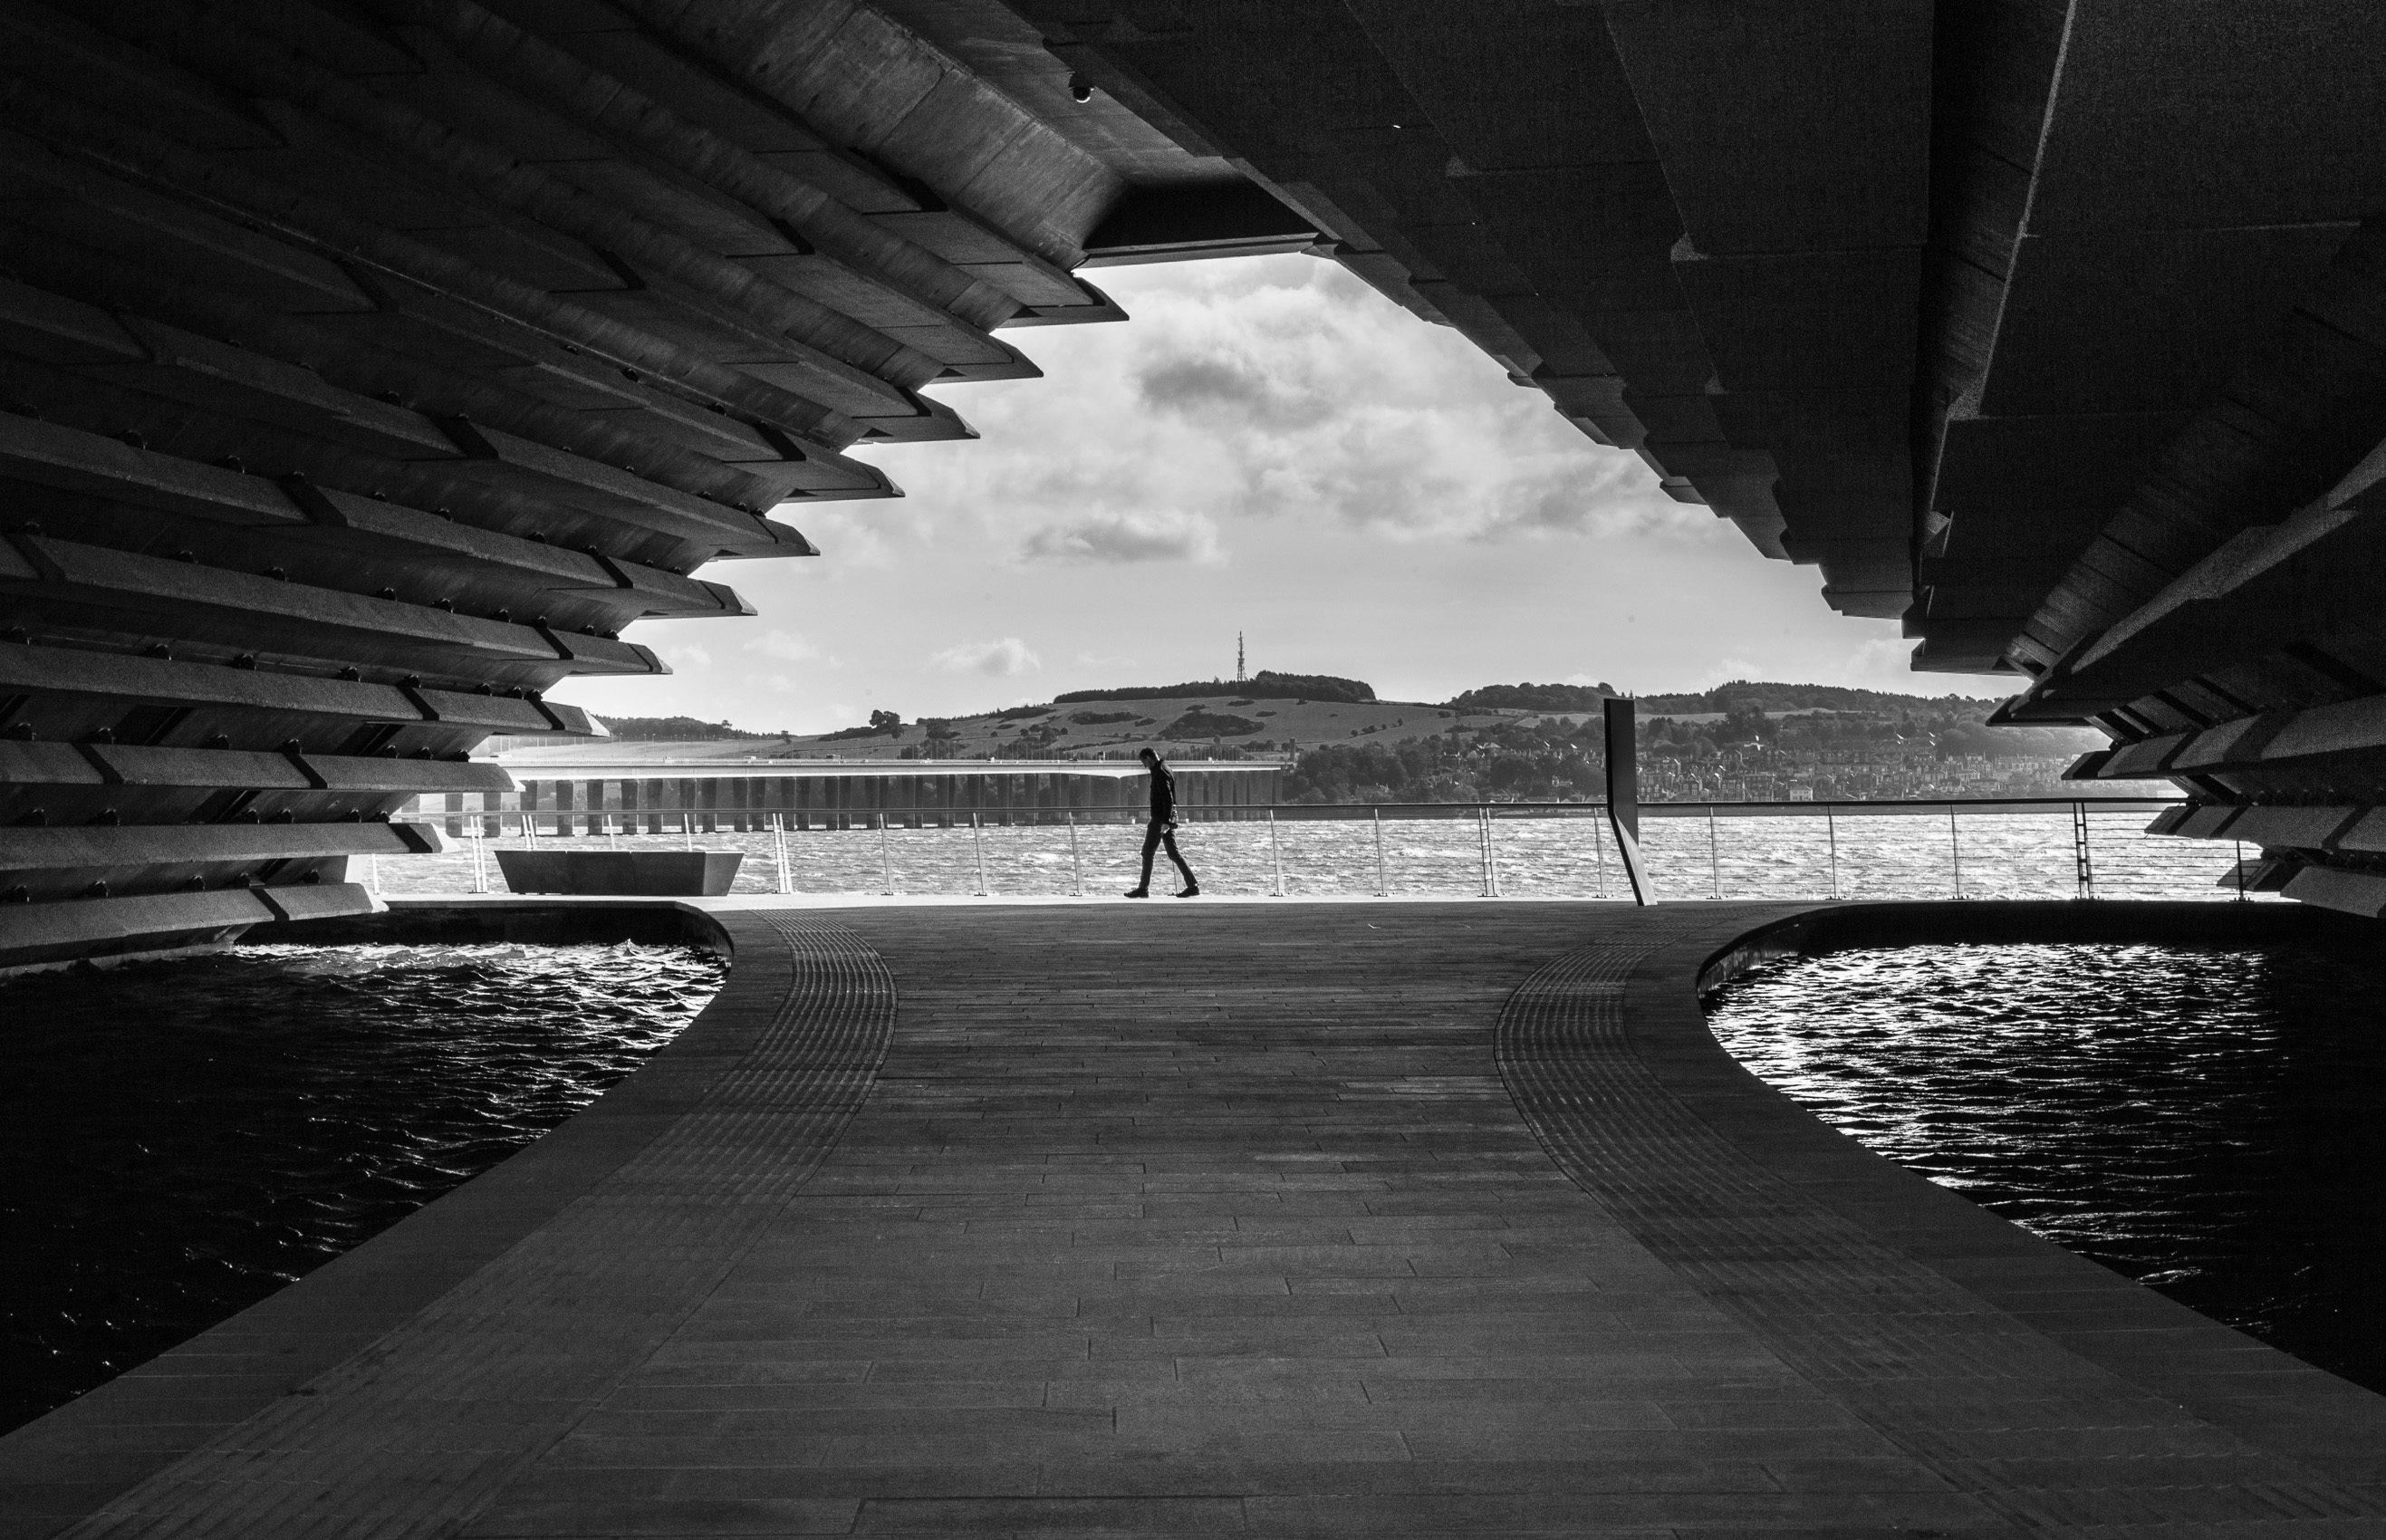 The space under the V&A Dundee Building, Dundee, Scotland, United Kingdom.